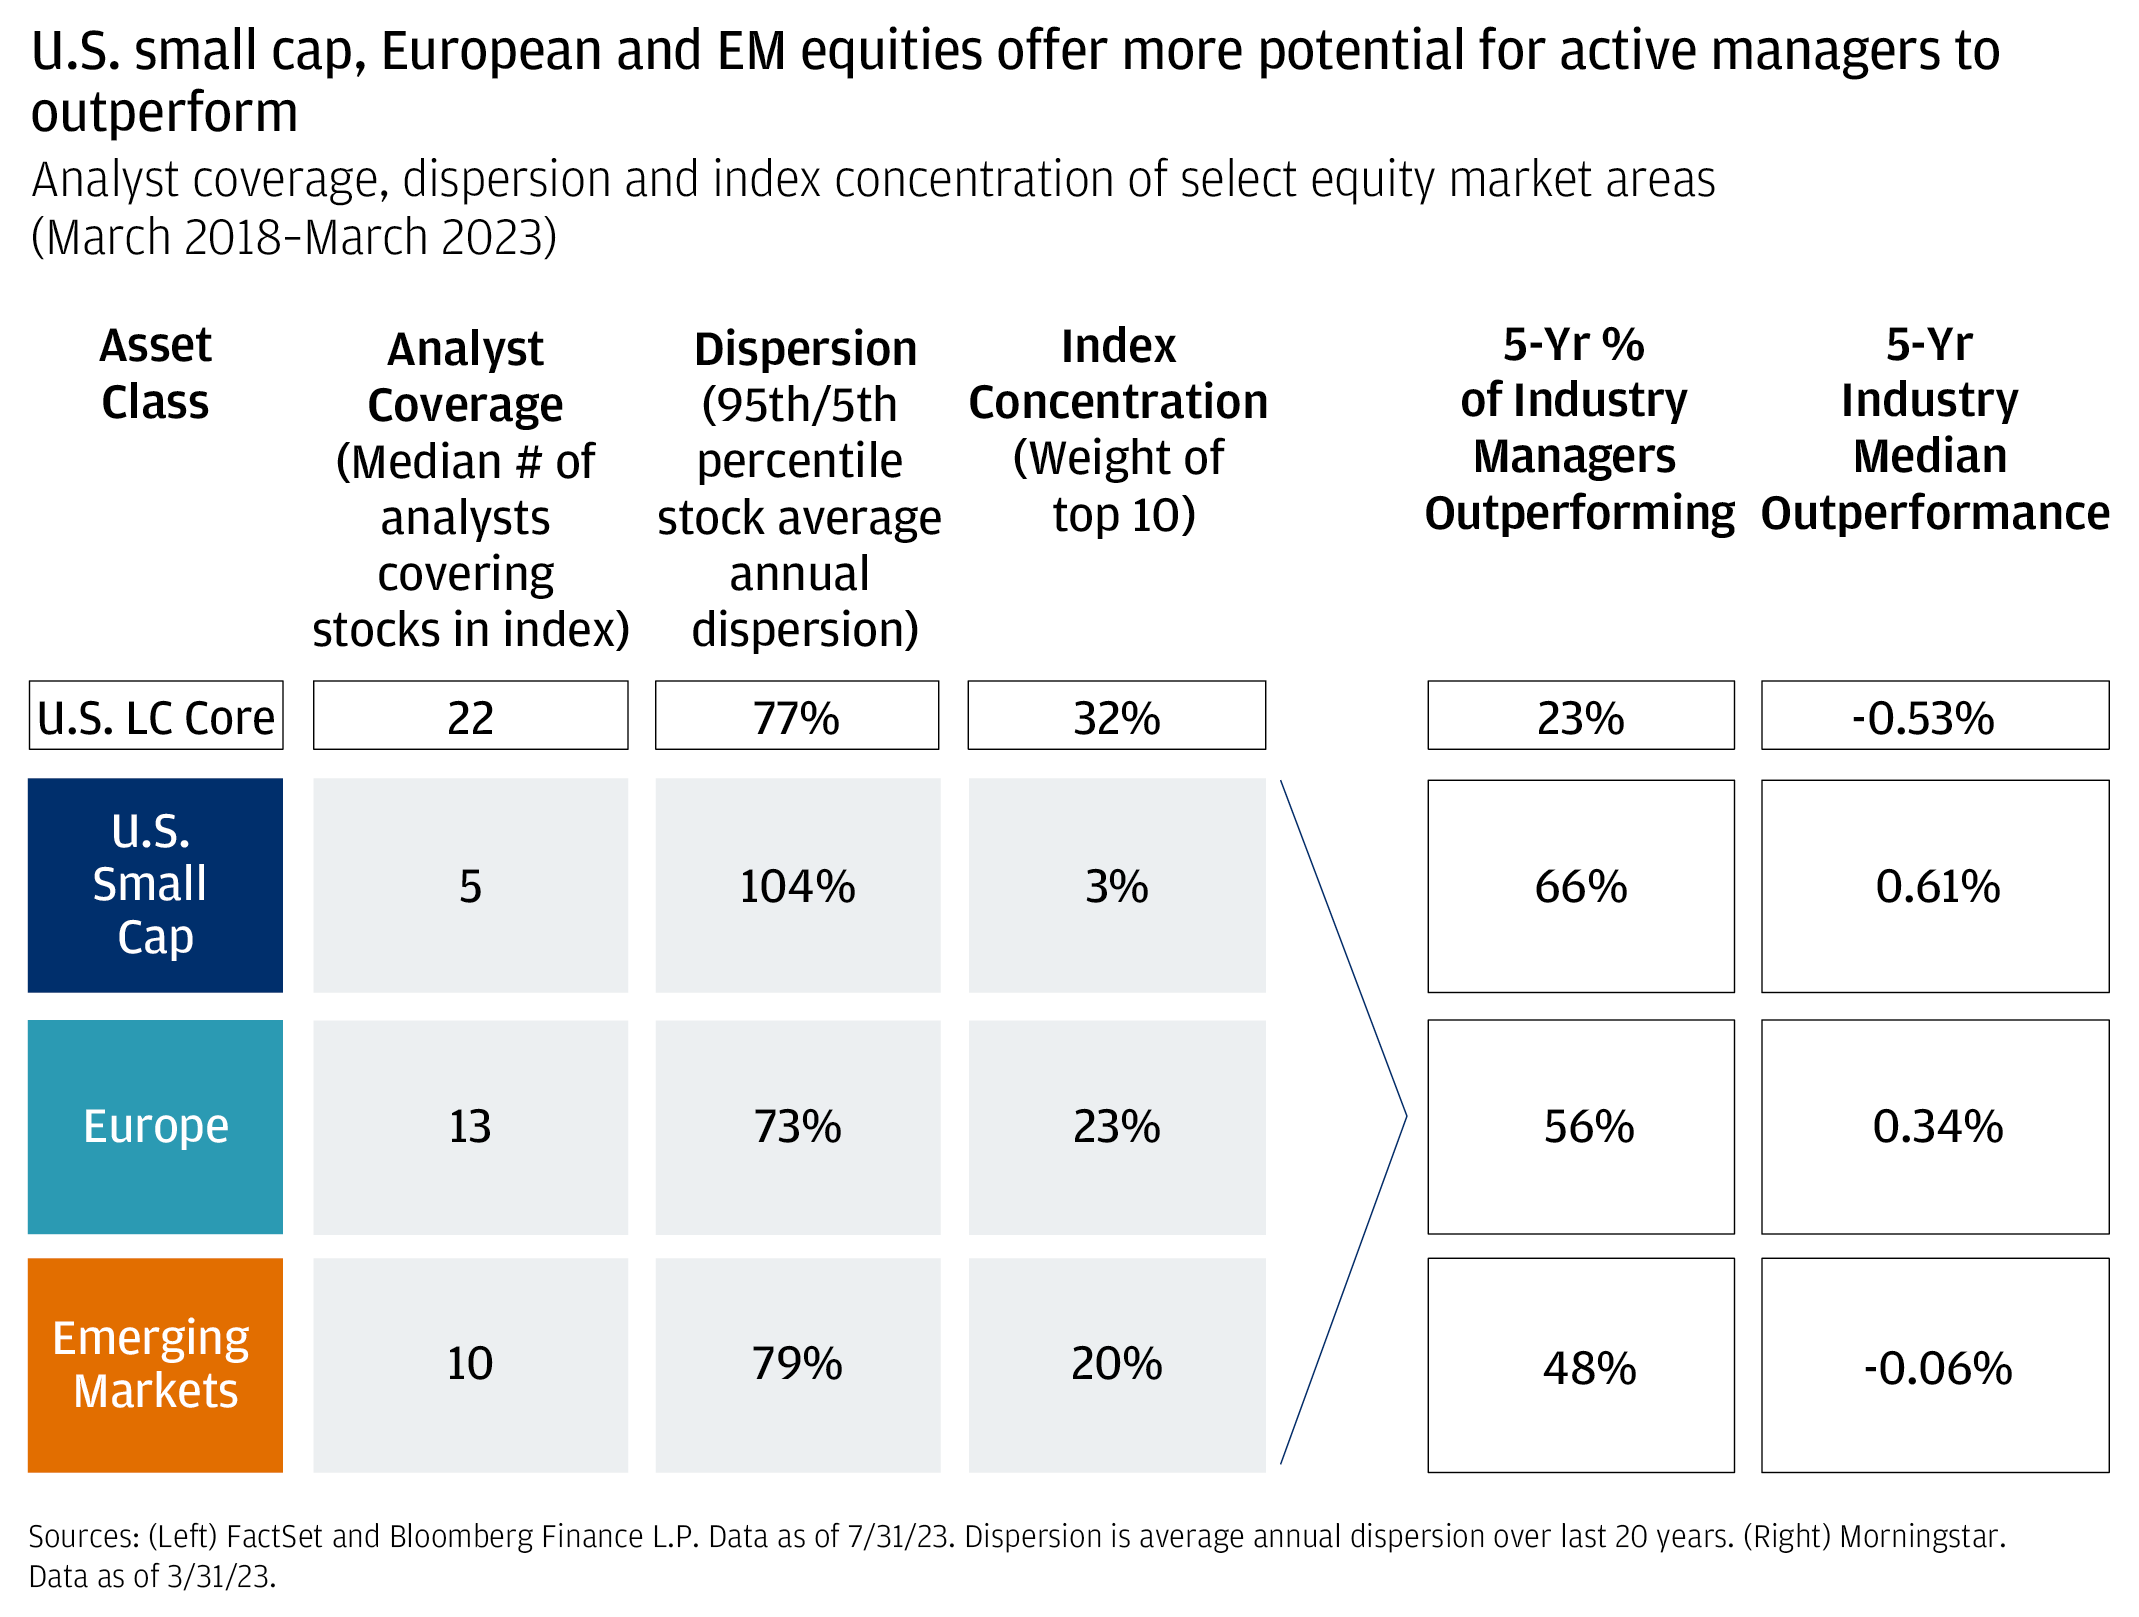 The chart shows analyst coverage of dispersion and index concentration of select equity market areas (March 2018-March 2023)